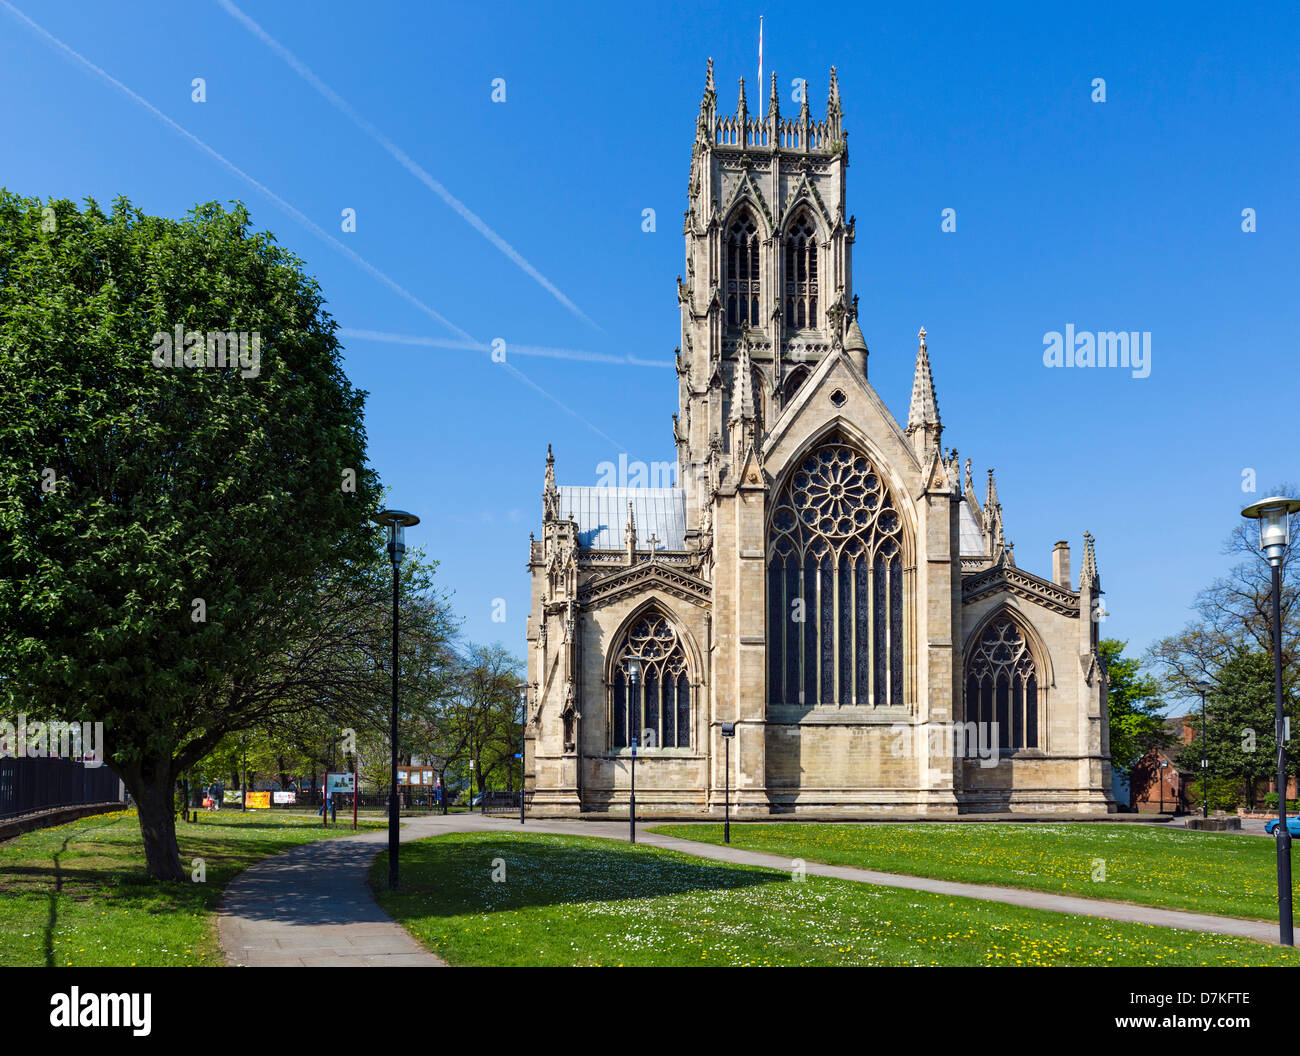 St George's Minster, Doncaster, South Yorkshire, Angleterre, Royaume-Uni Banque D'Images